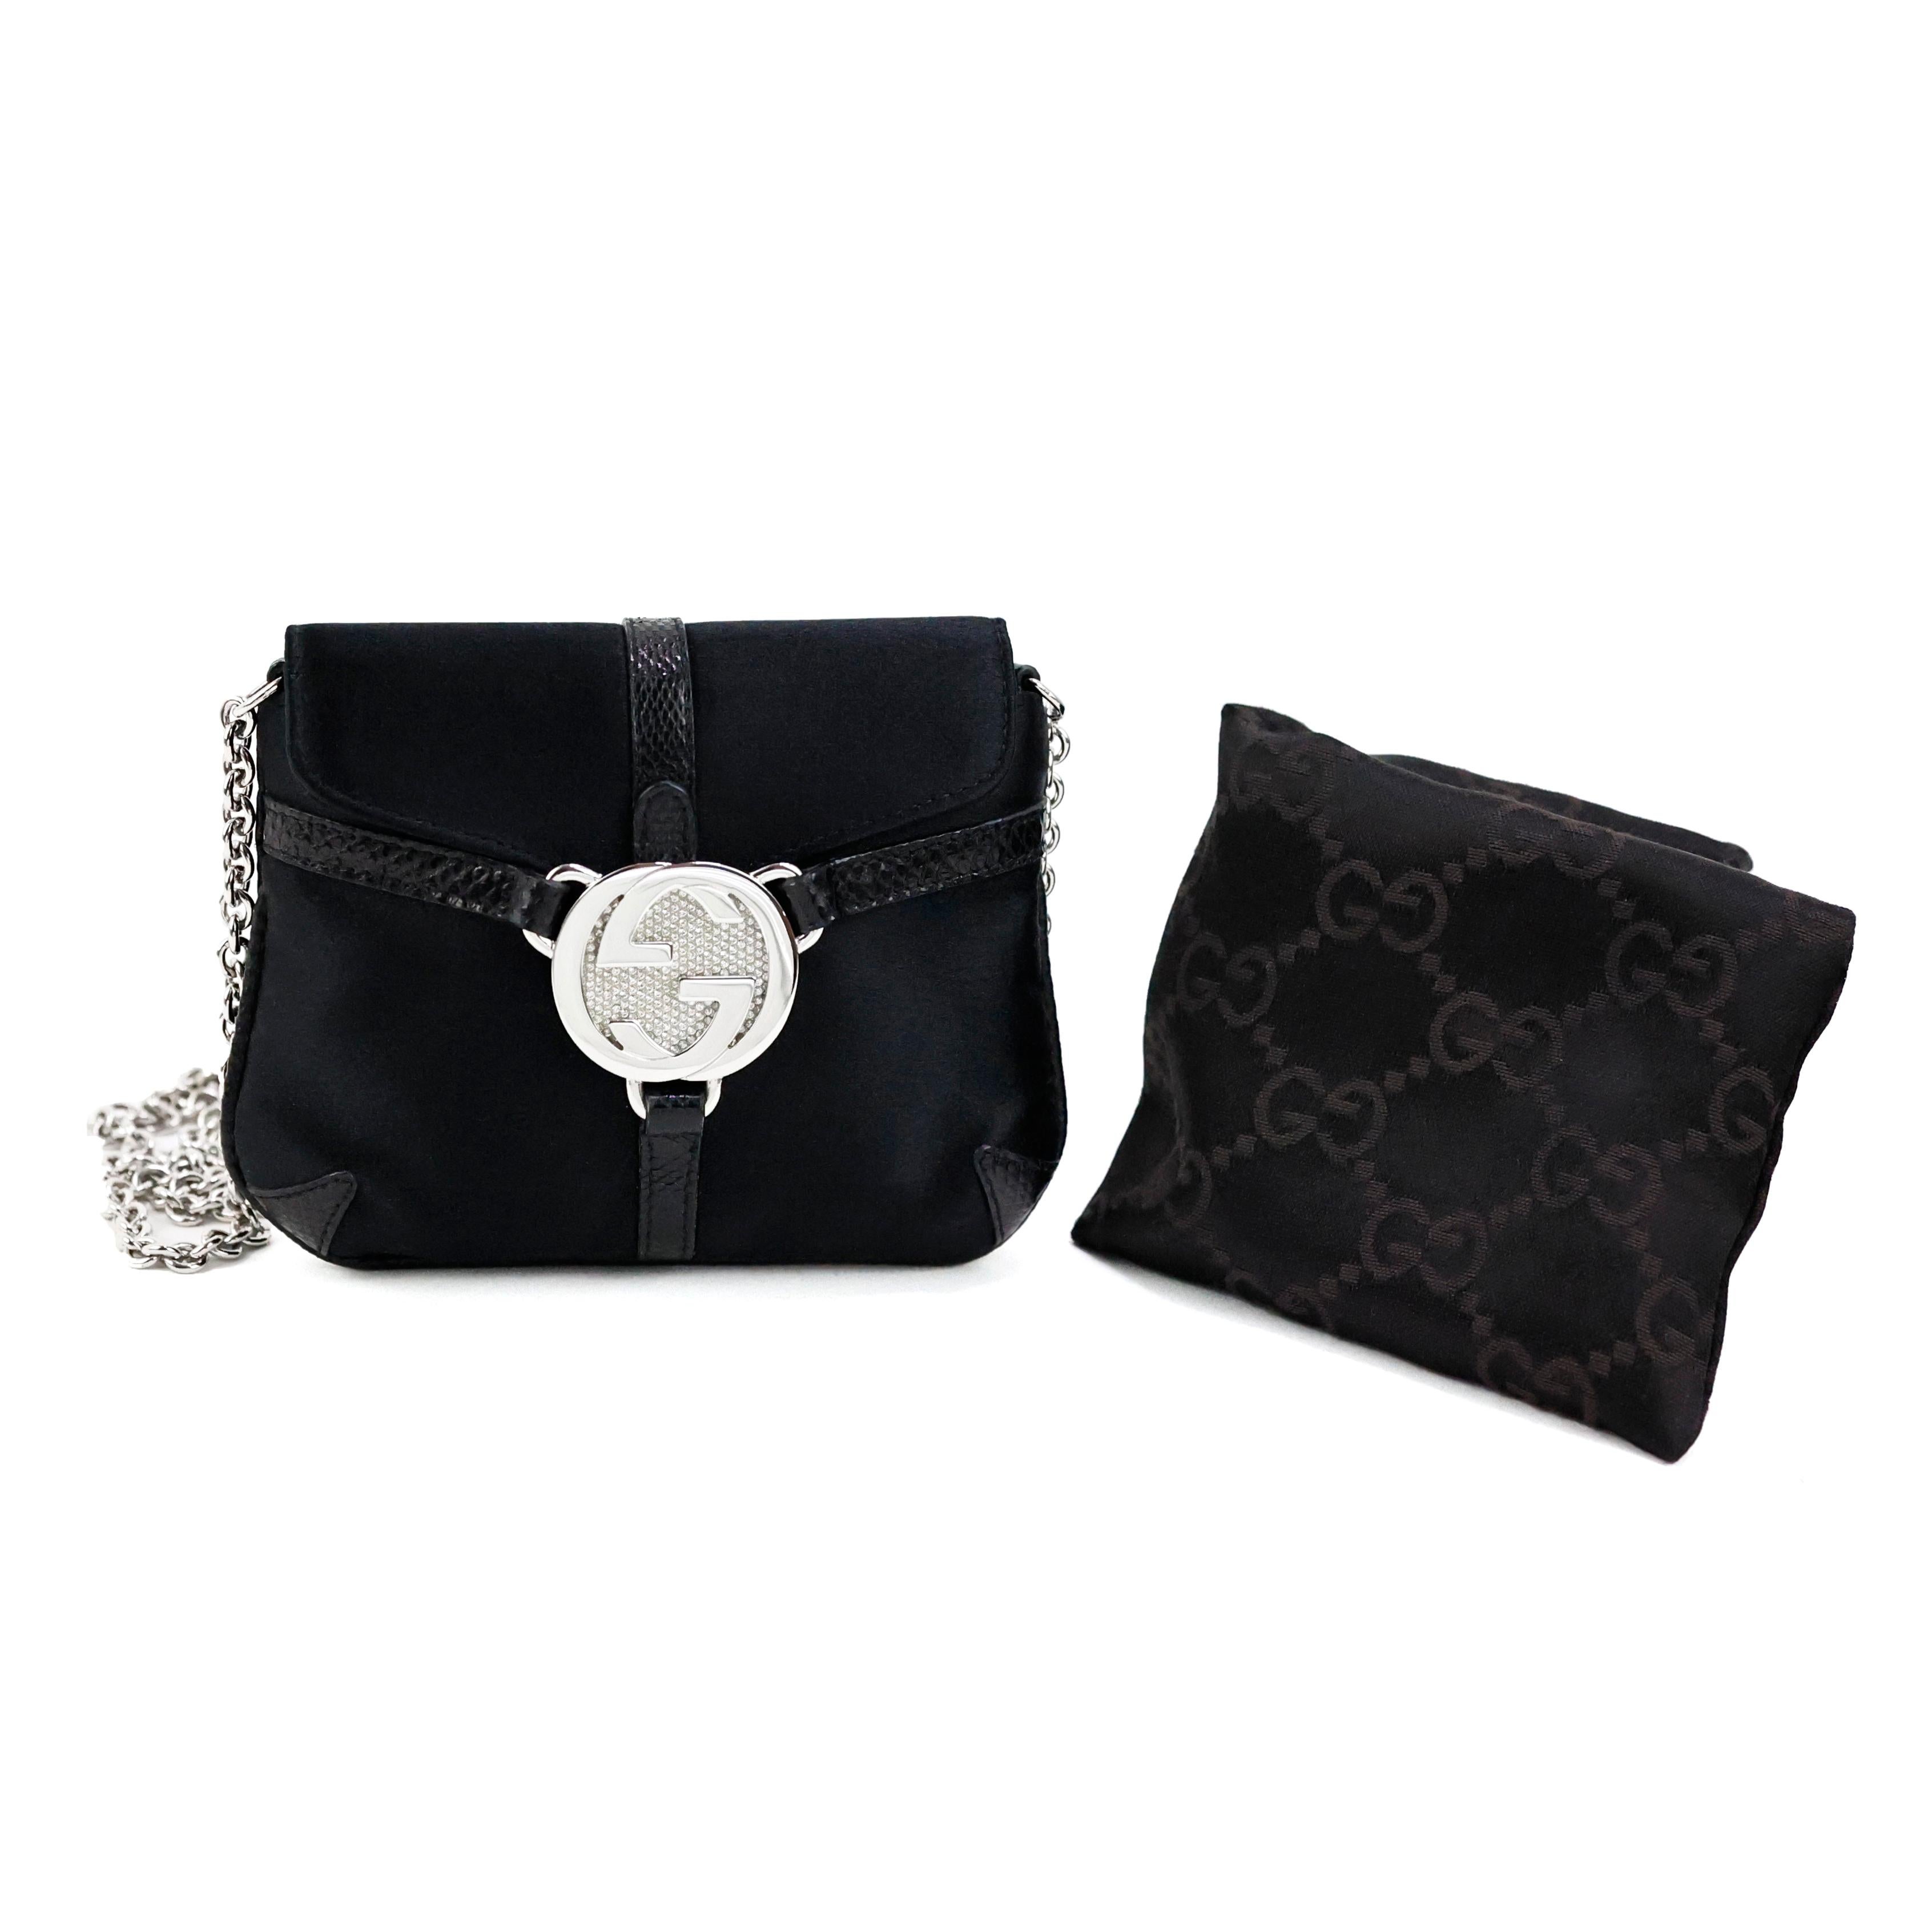 Rare Gucci by Tom Ford mini GG interlocking crystal embellished crossbody bag in silk, color black, silver hardware.

Condition:
Excellent.

Packing/accessories:
Dustbag.

Measurements:
15cm x 12cm